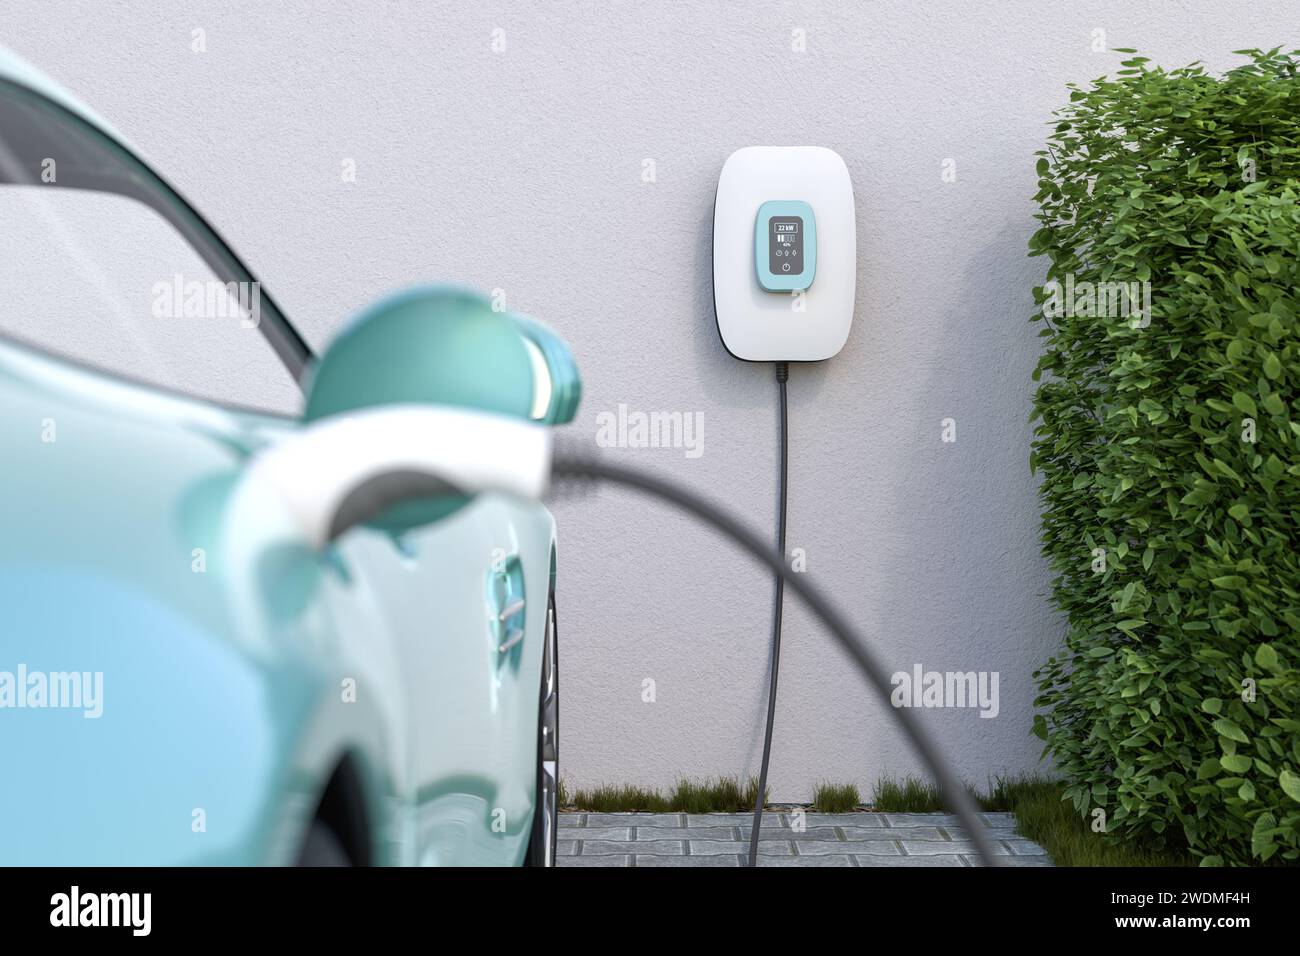 Charging an electric vehicle at home with a wallbox. Focus on the wallbox displaying status information. Selective focus. Stock Photo